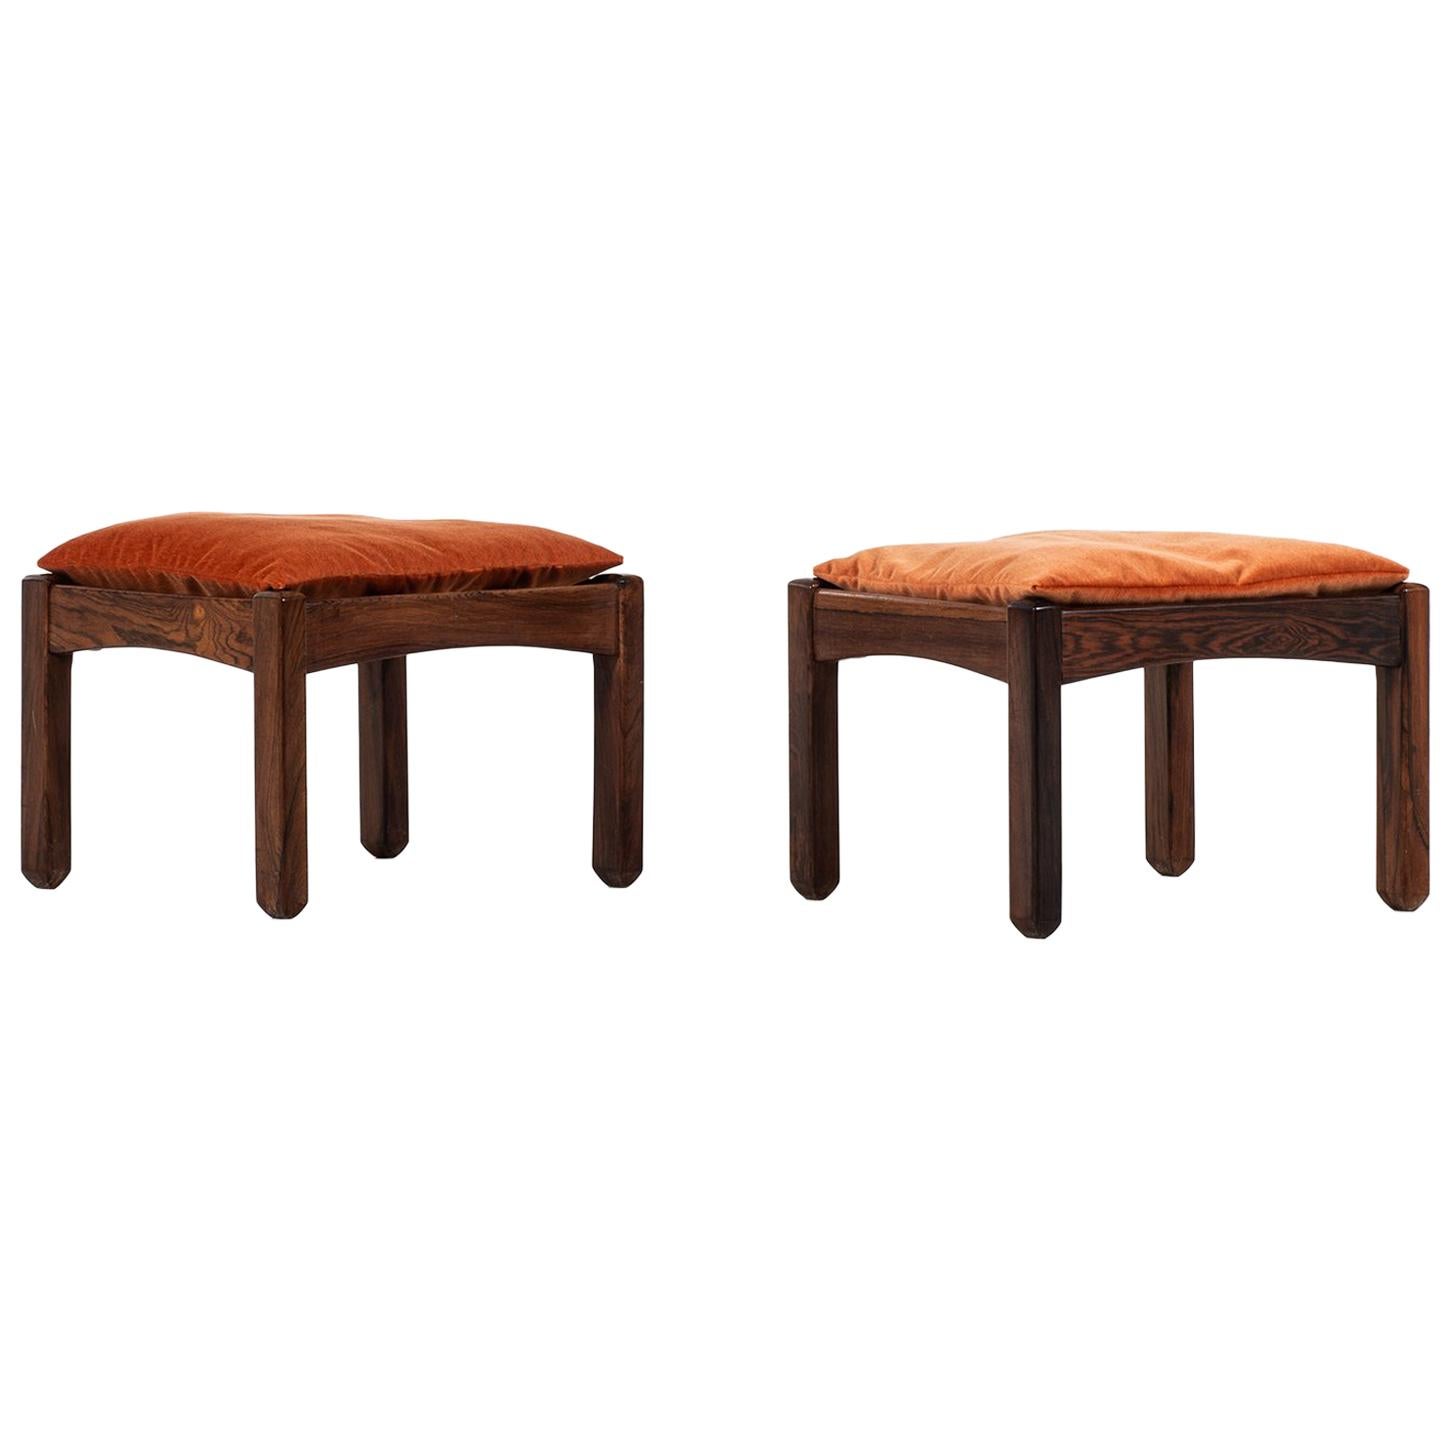 Pair of Stools in Rosewood and Velvet Probably Produced in Brazil